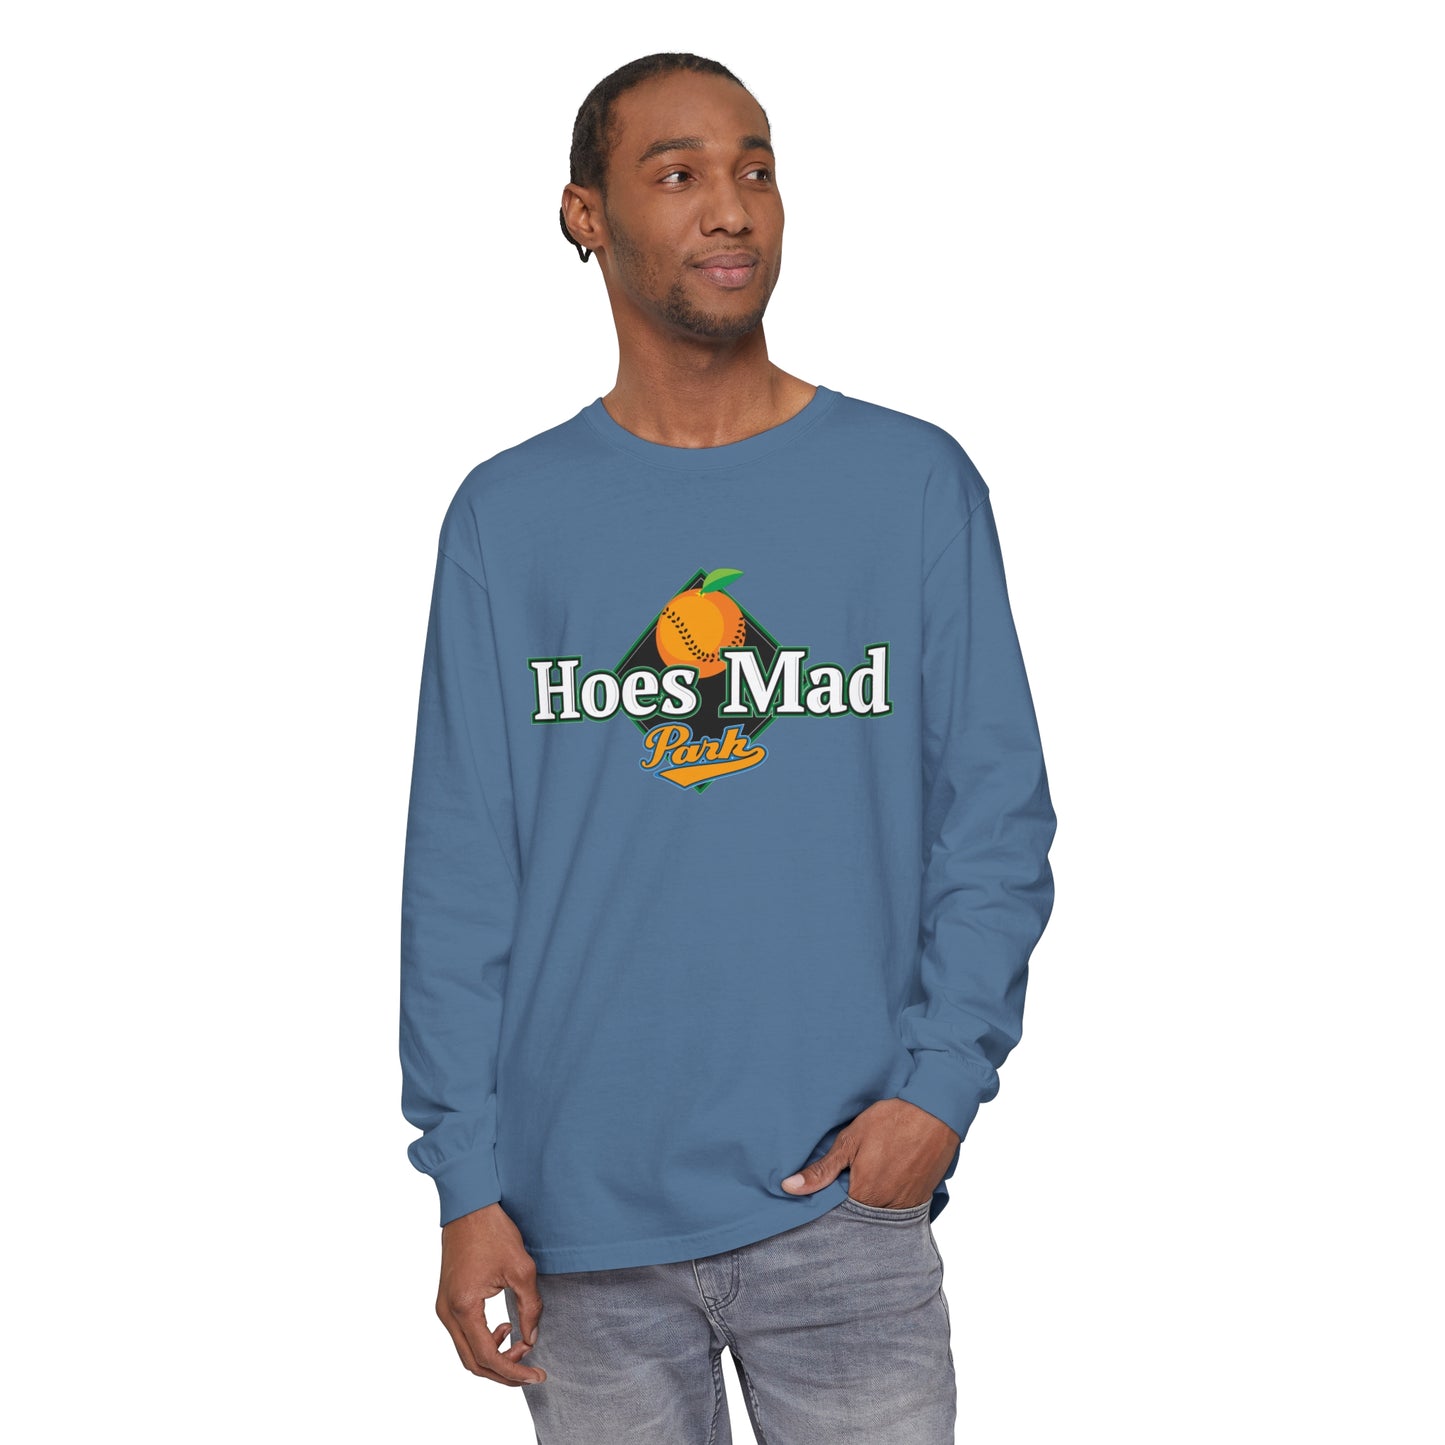 Hoes Mad Long Sleeve Tee